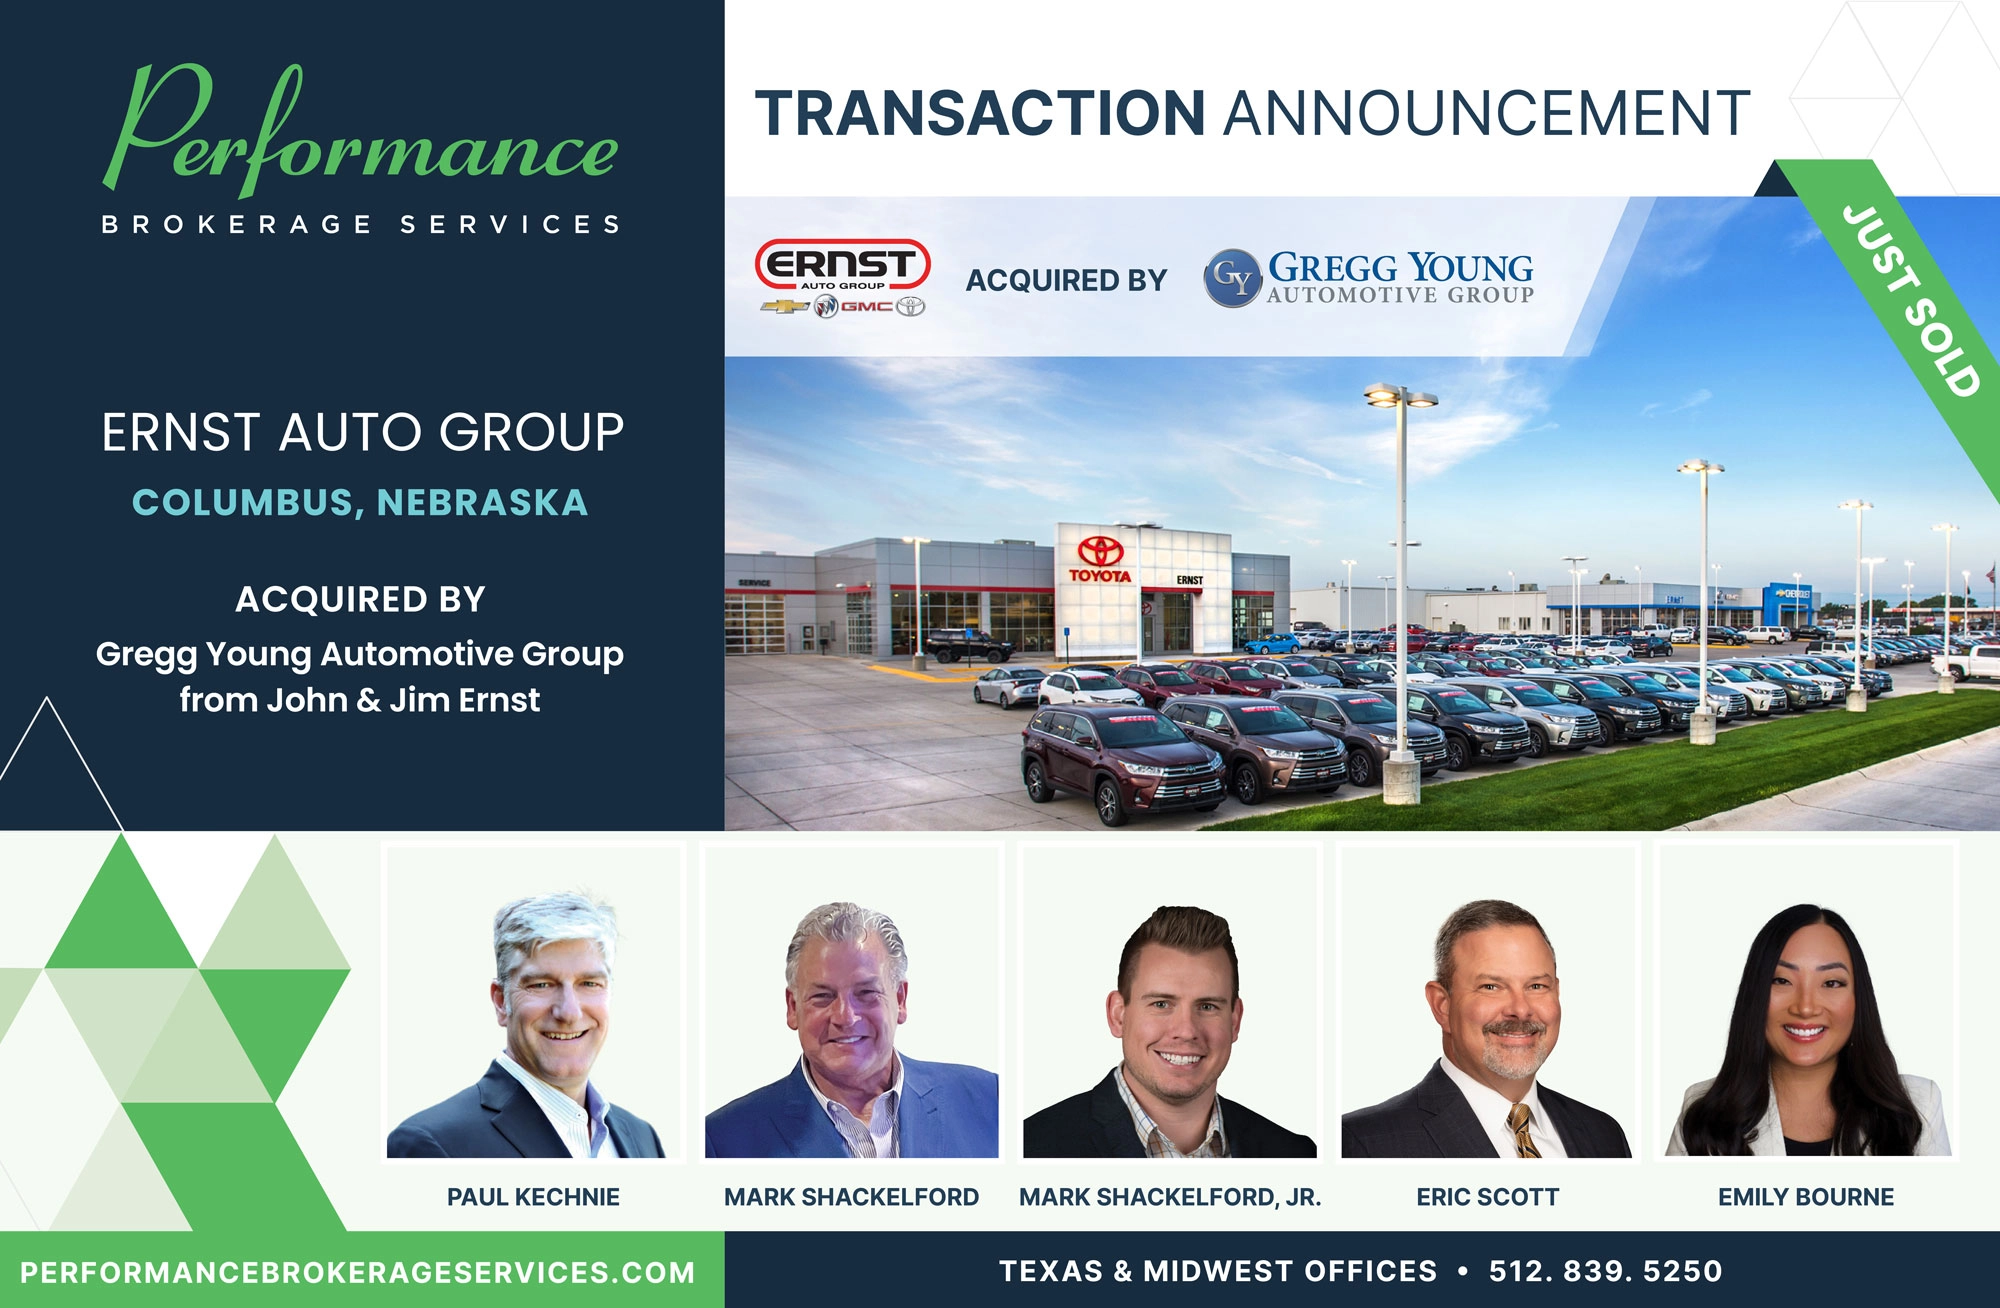 Ernst Auto Group sells to gregg young automotive group with performance brokerage